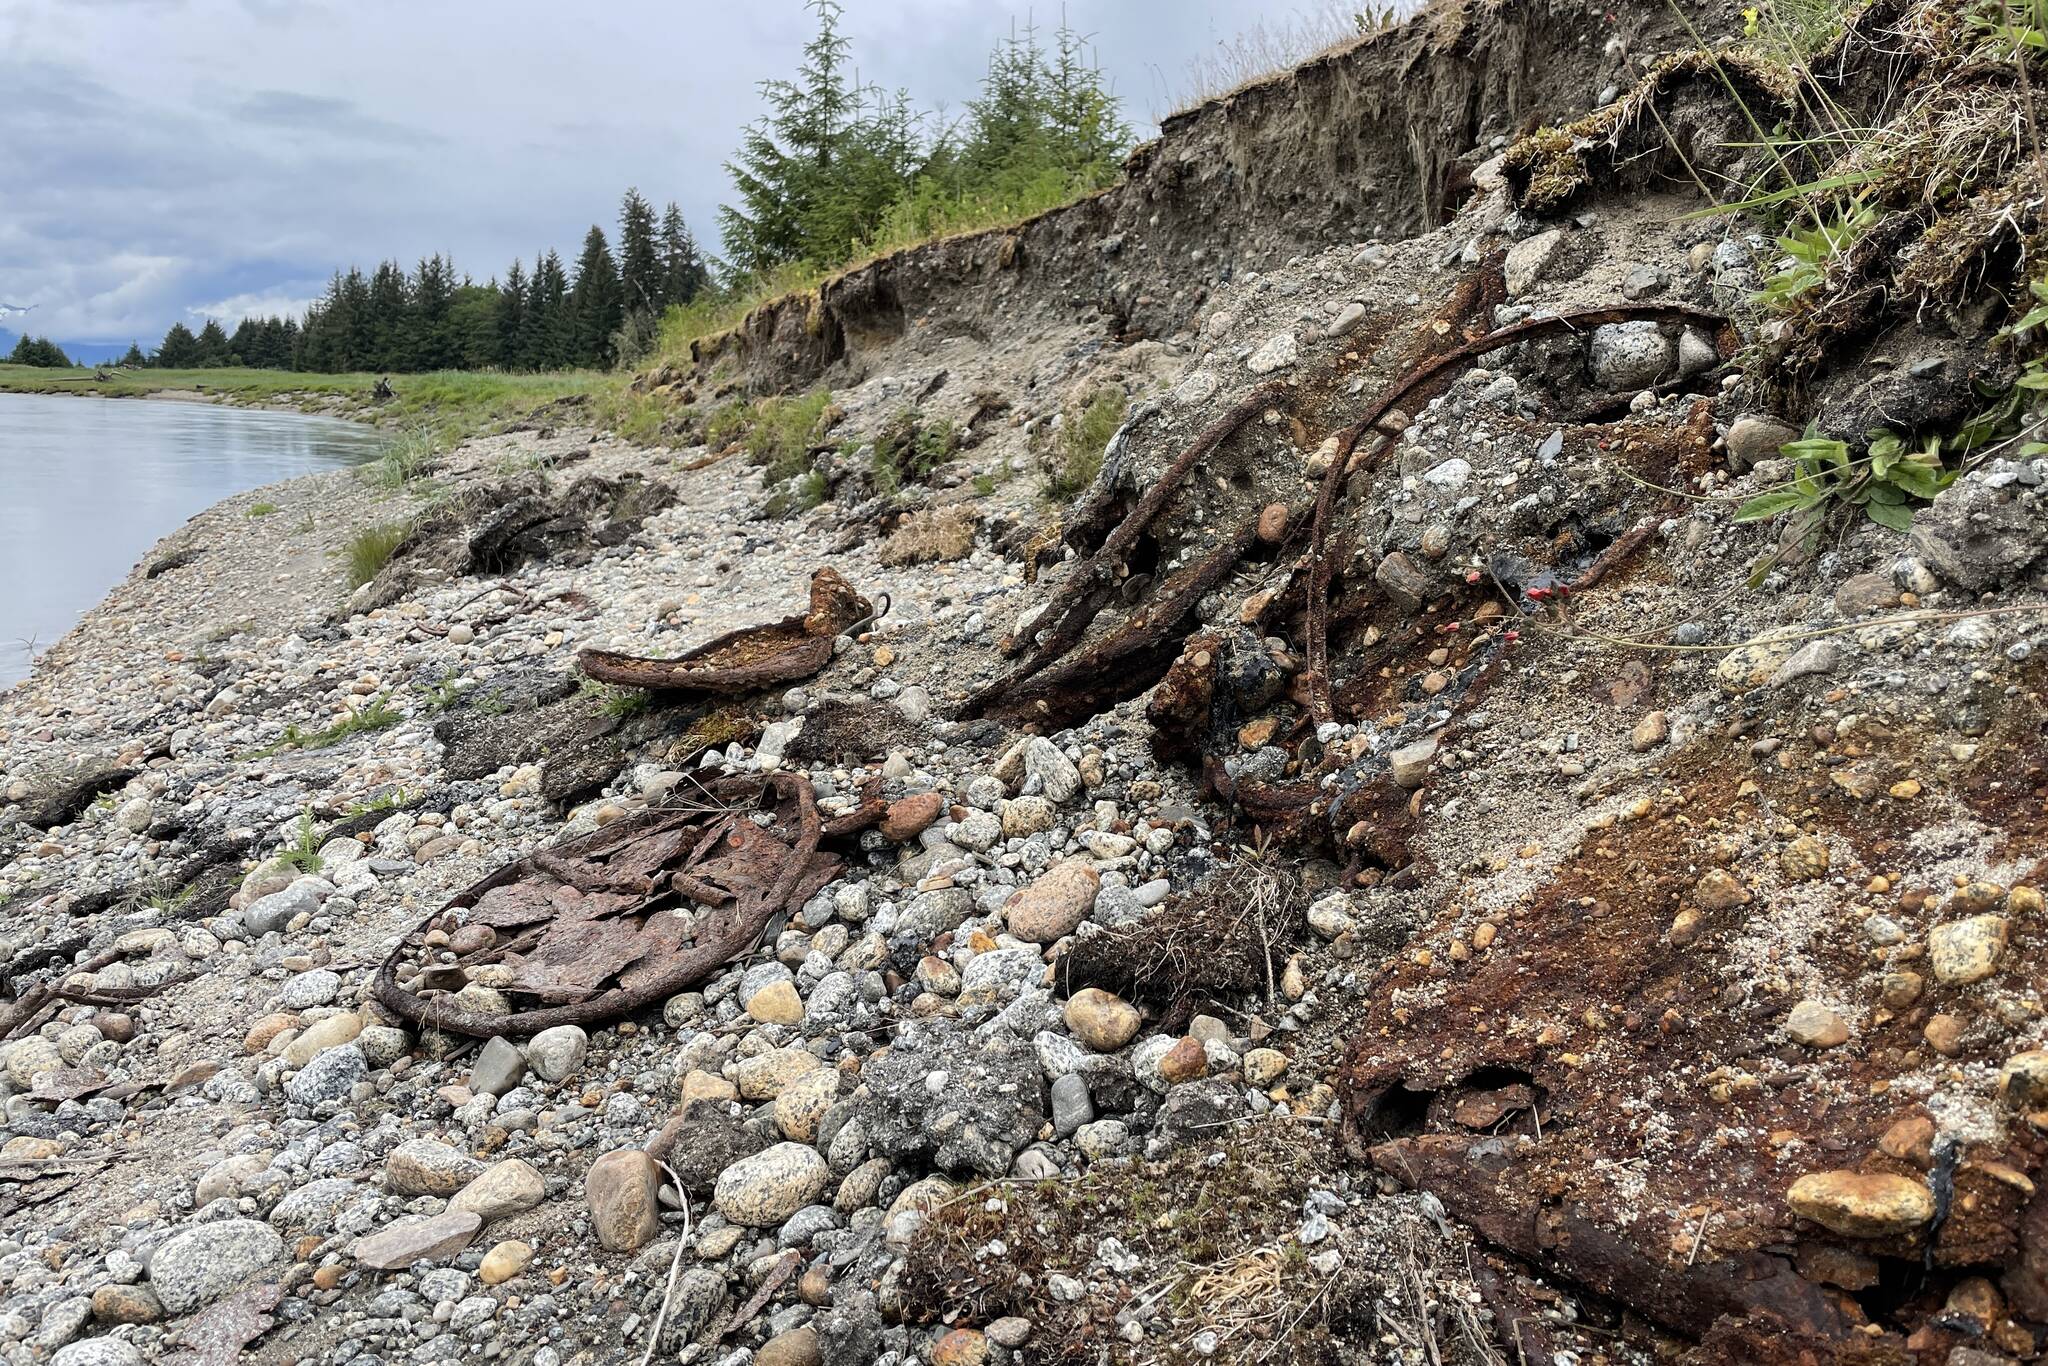 Rusted debris from oil cans and other waste on the riverbank of the Eagle River as erosion exposes more debris from roadbuilding infrastructure buried decades. (Michael S. Lockett / Juneau Empire)